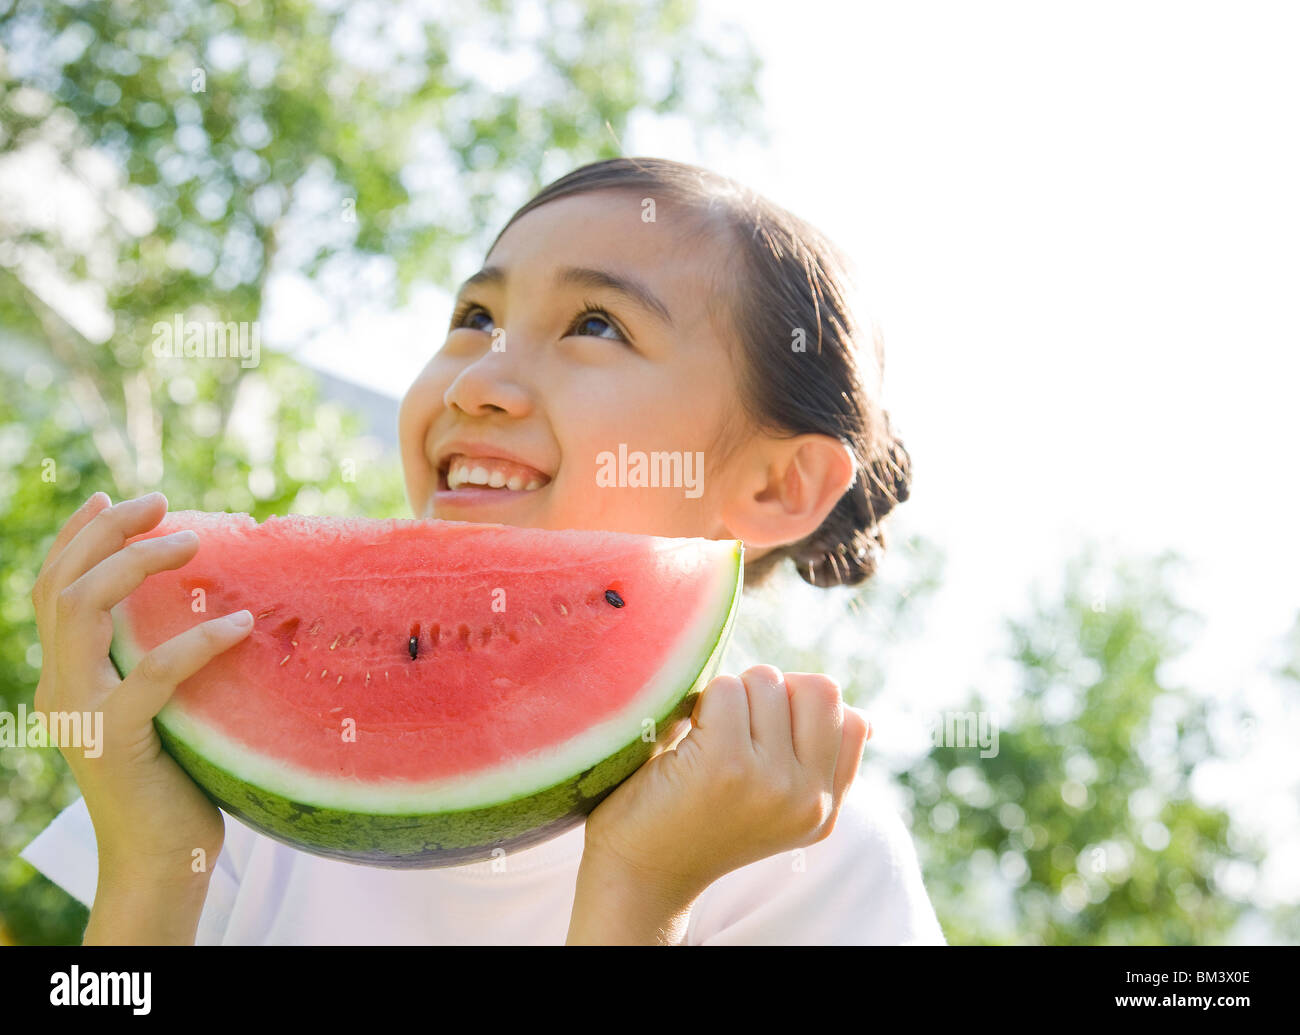 Smiling Girl Holding a Slice of Watermelon Stock Photo